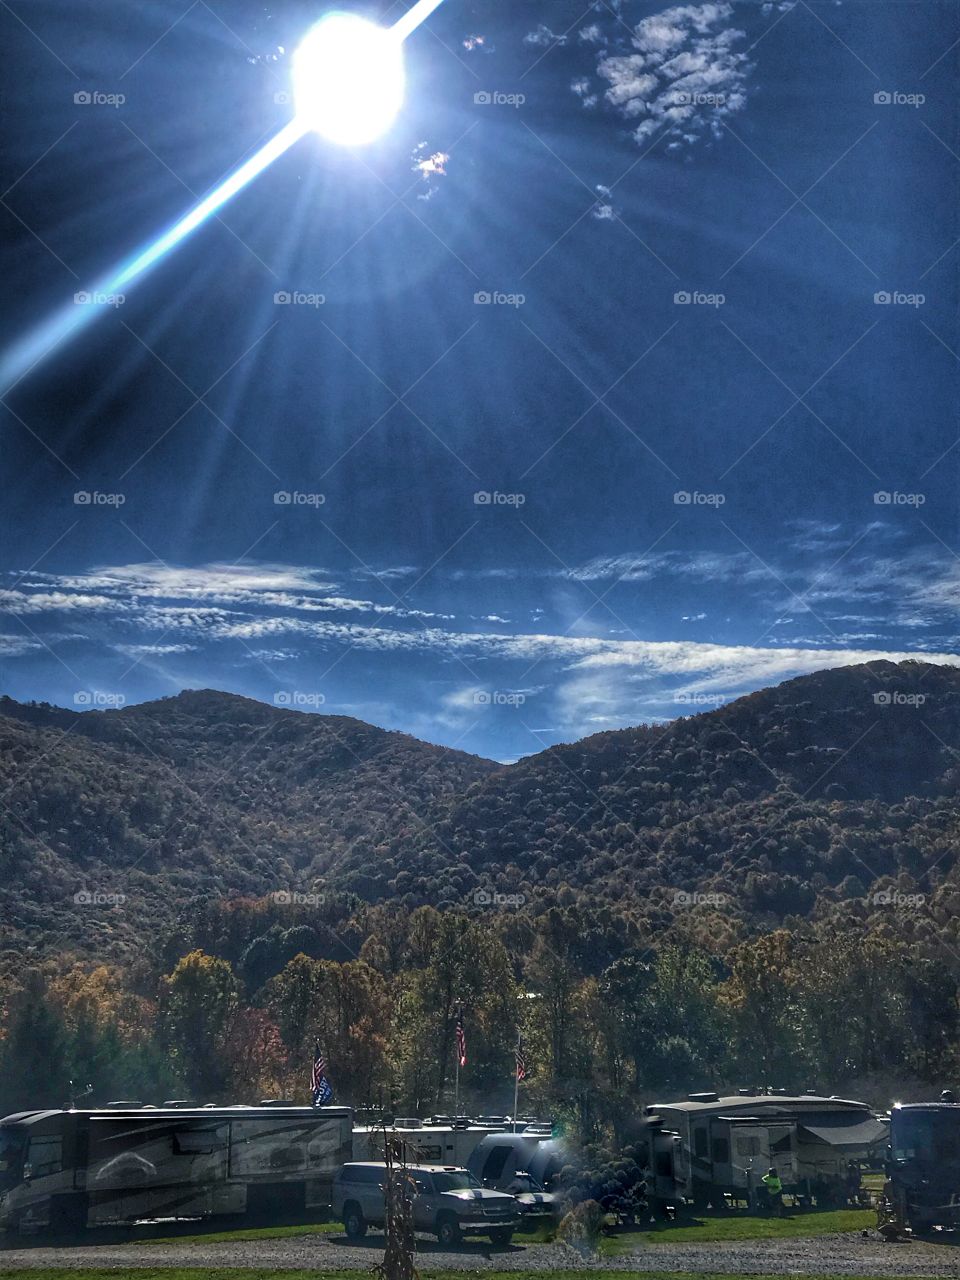 The suns rays and a few clouds over a mountain range with campground in foreground 